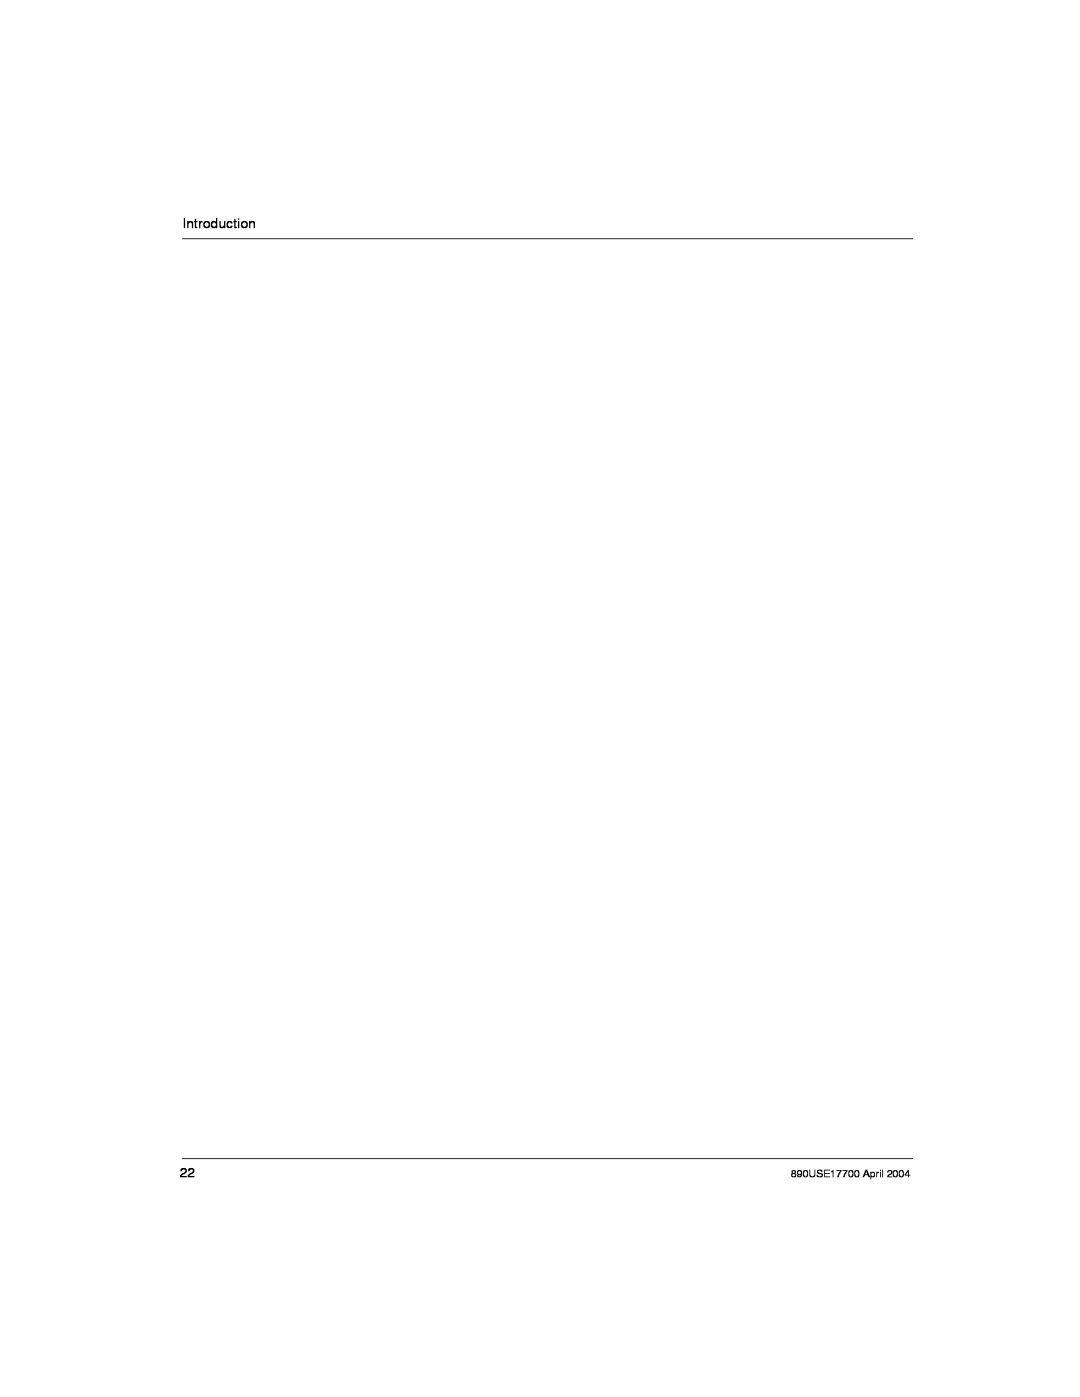 Schneider Electric manual Introduction, 890USE17700 April 